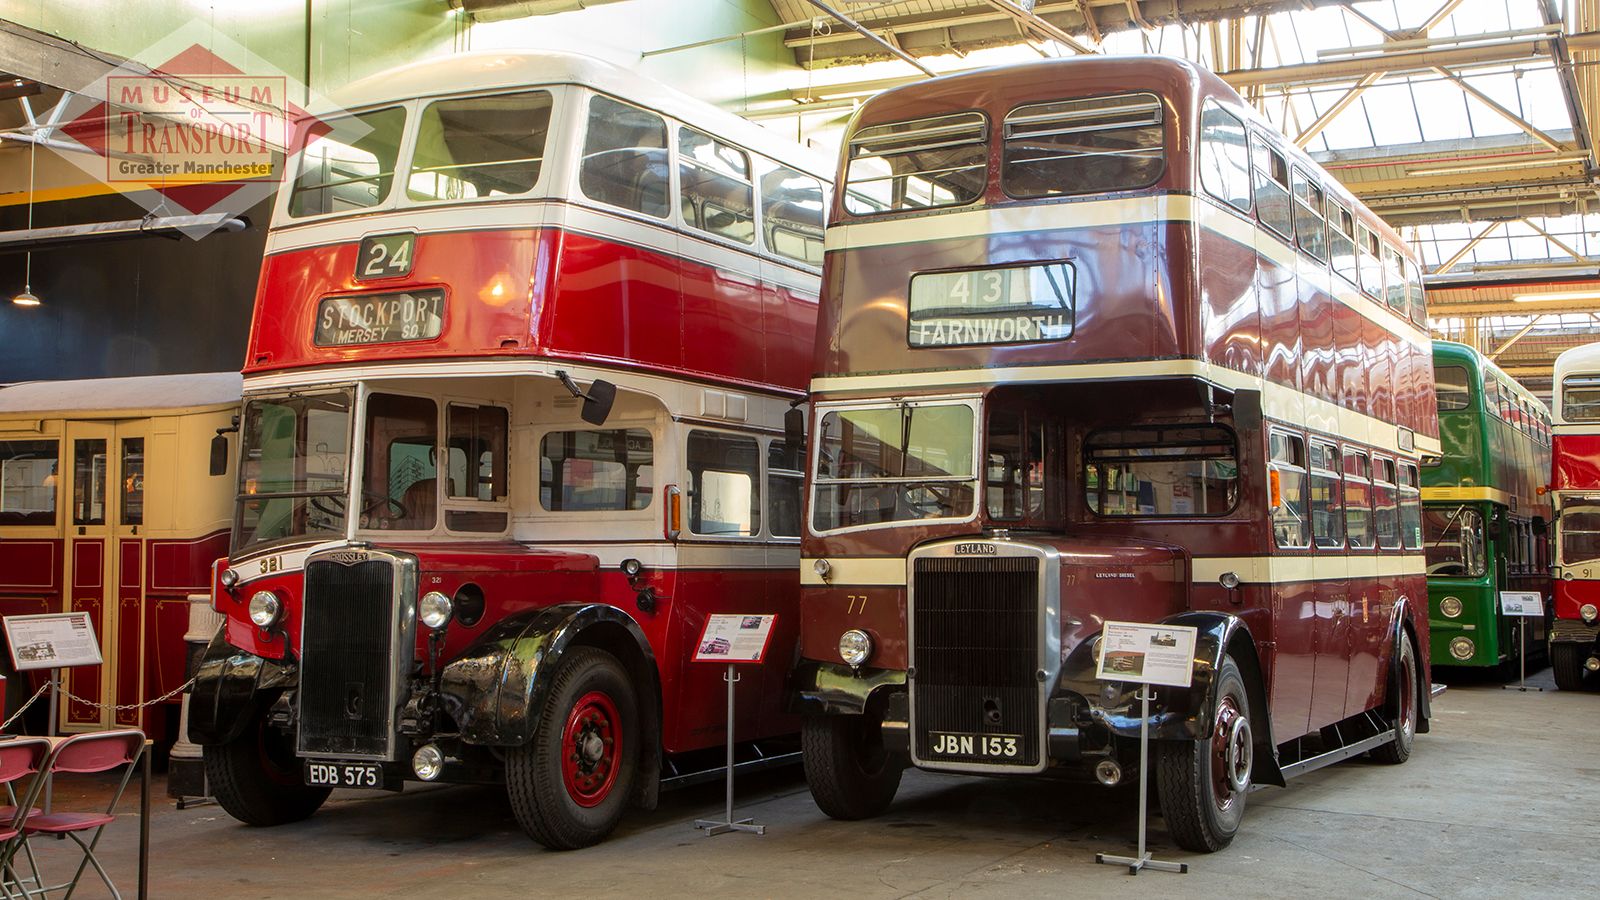 Retro buses at the Museum of Transport Manchester